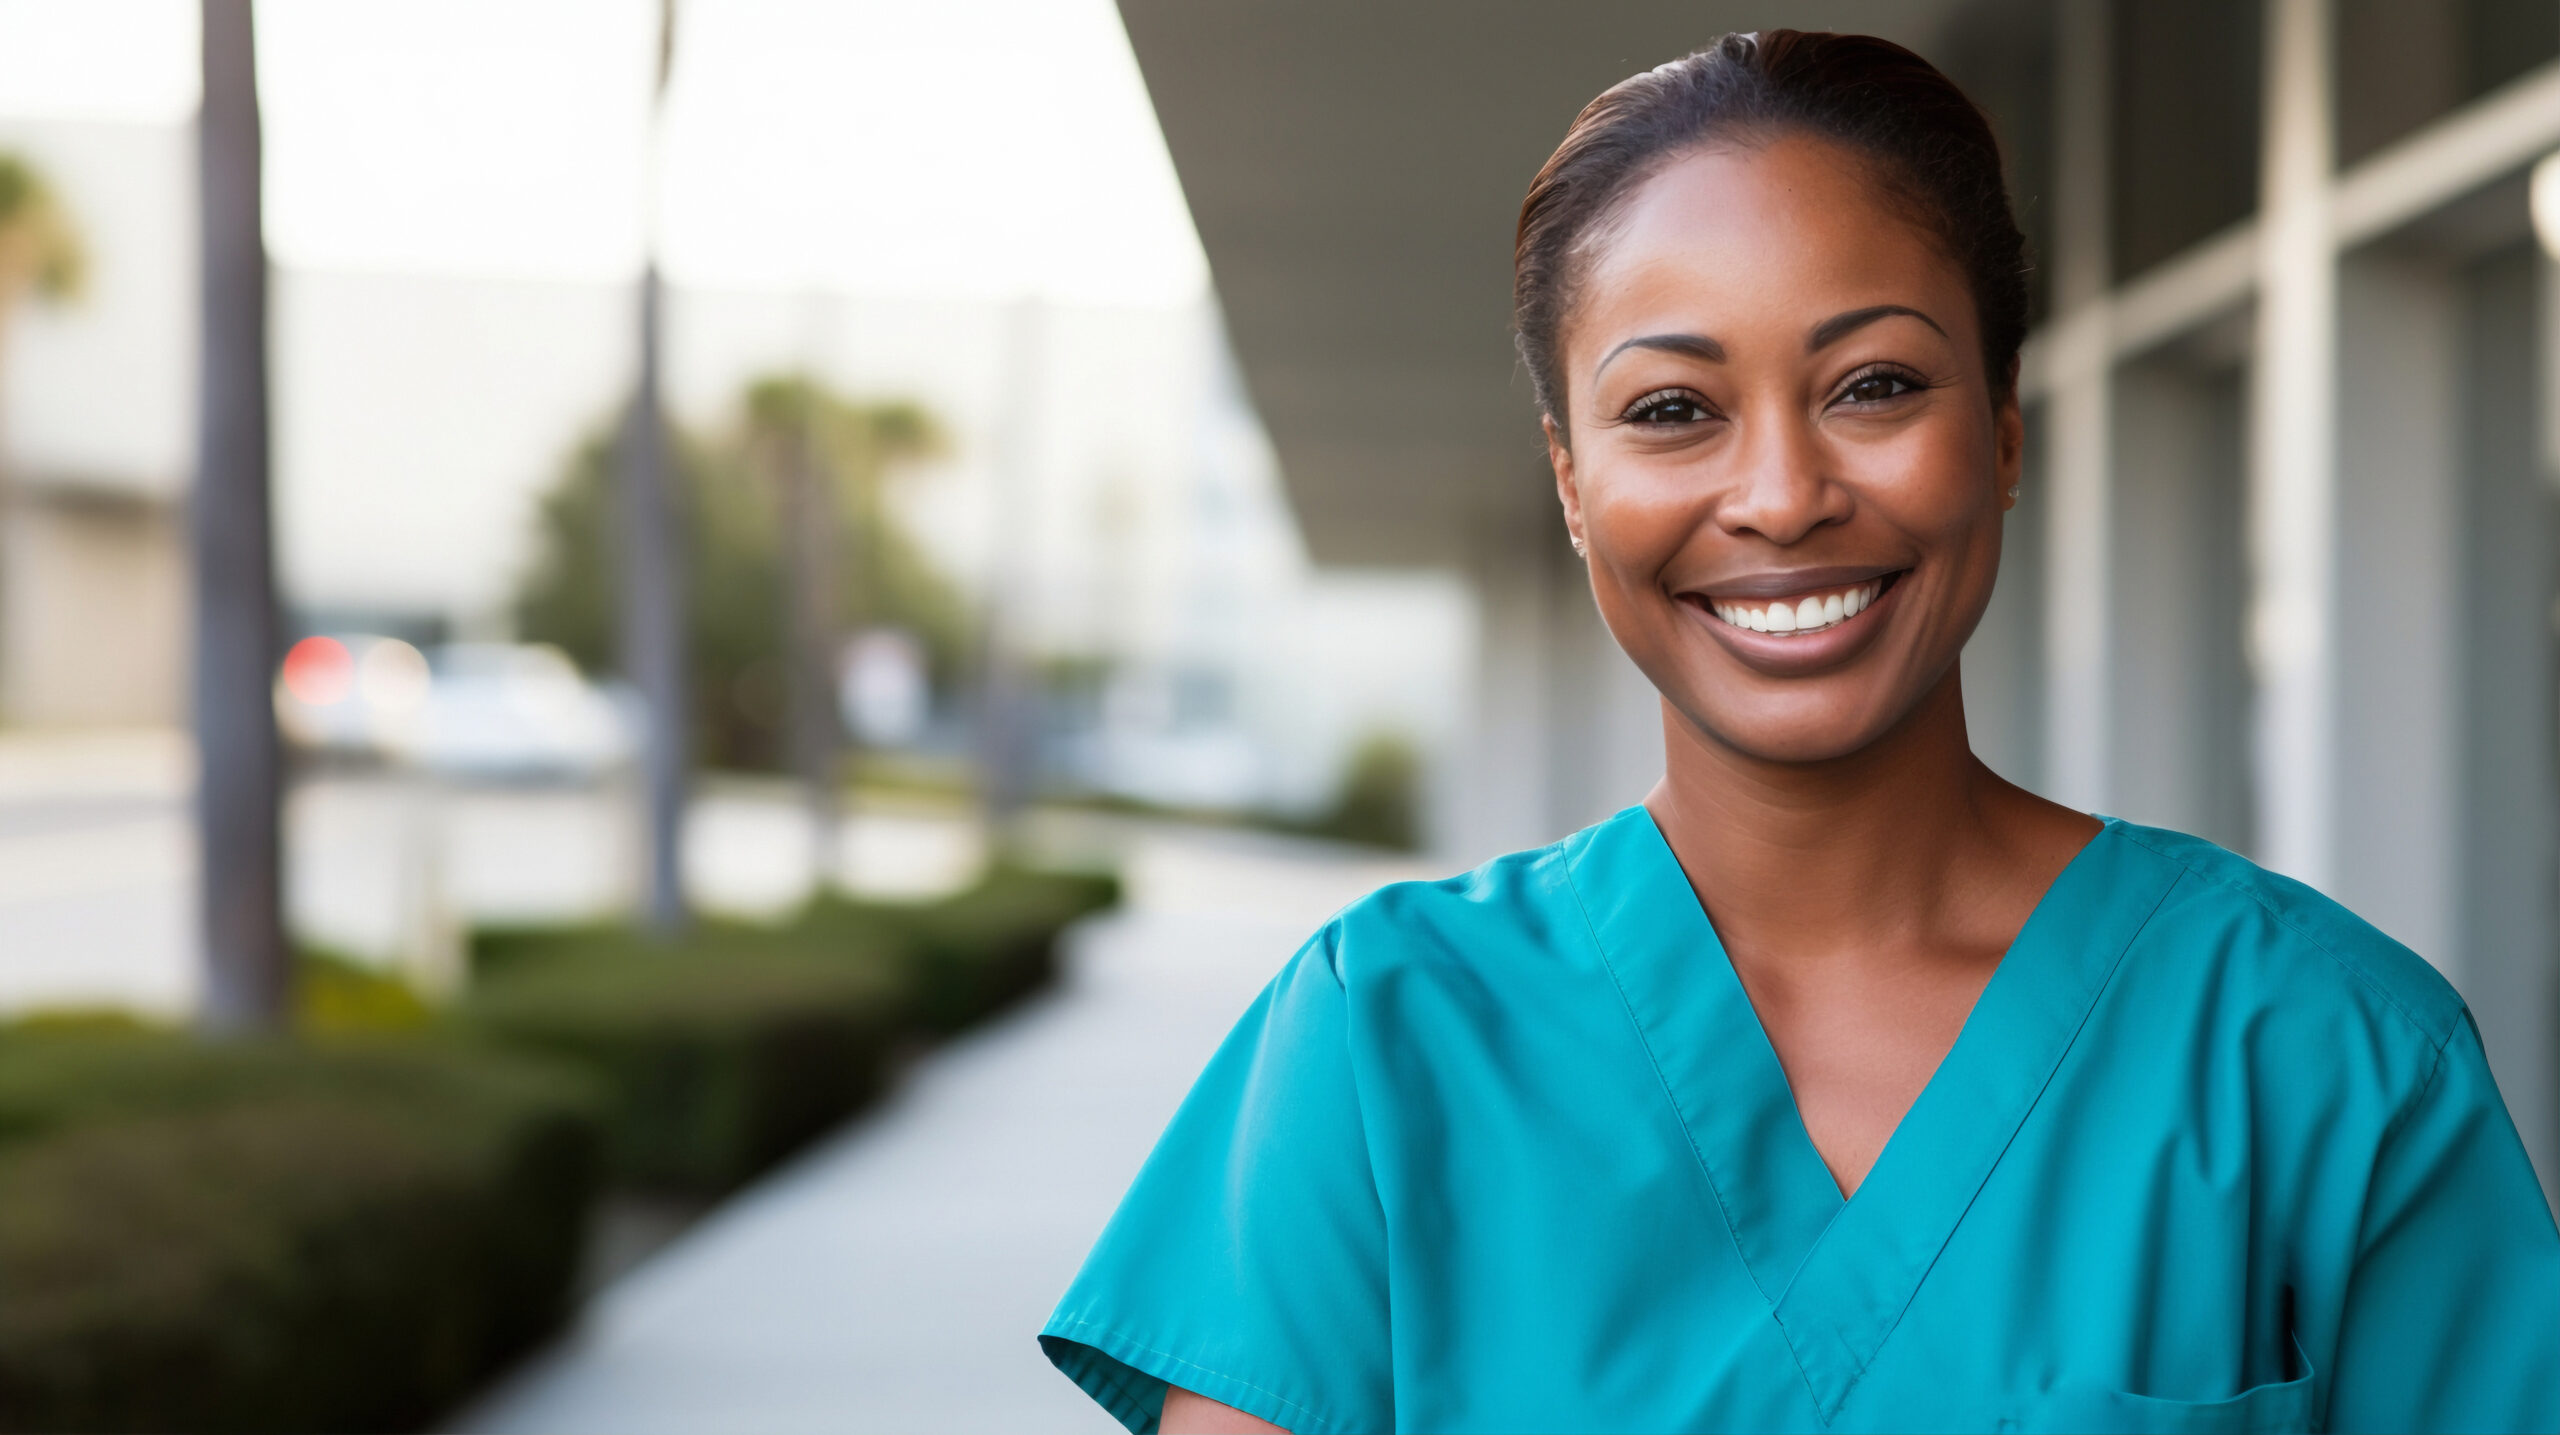 Challenges and Rewards of Being a CNA